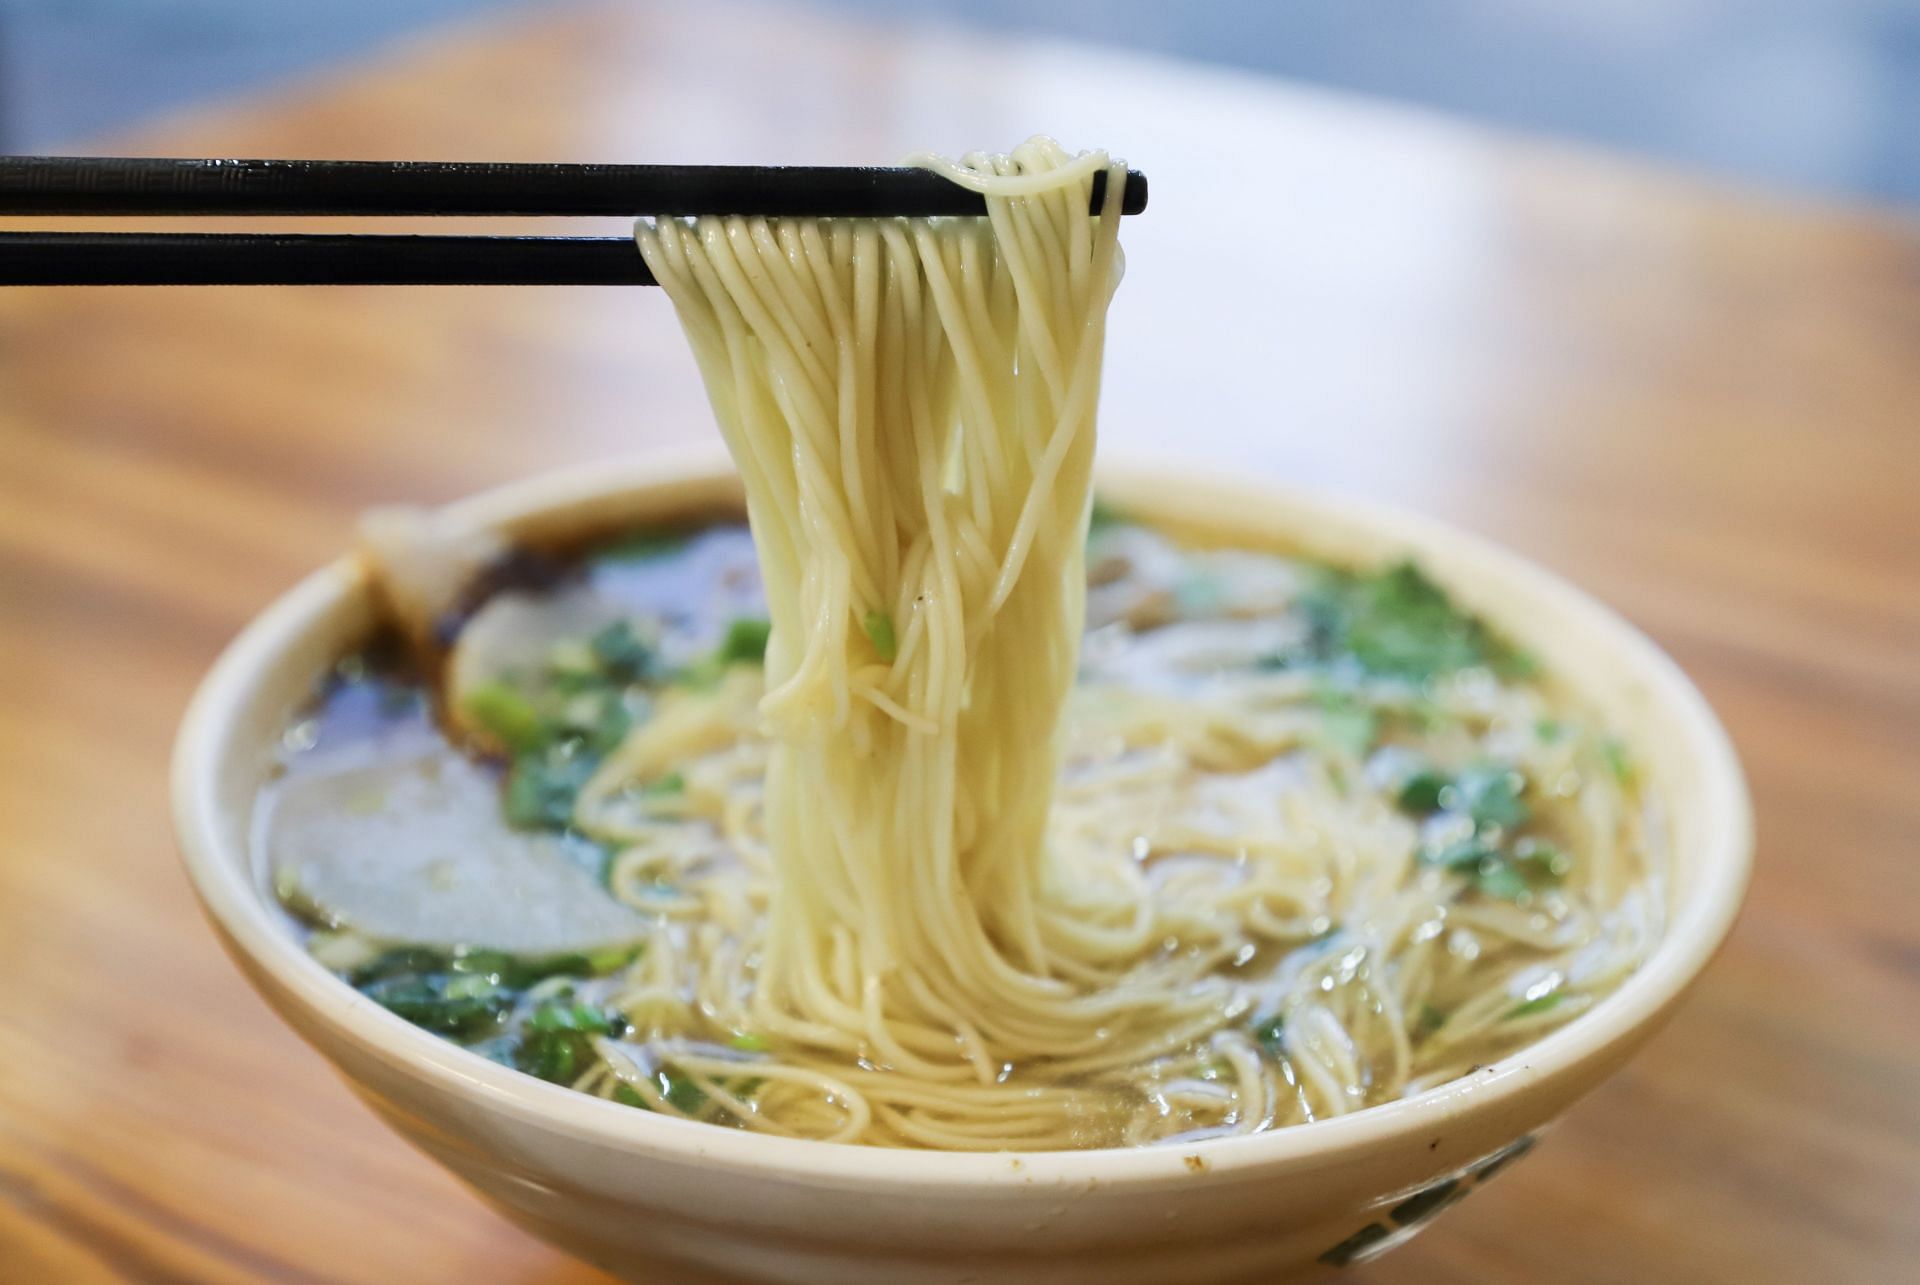 Is miso soup healthy? (Image via Pexels / Cats coming)